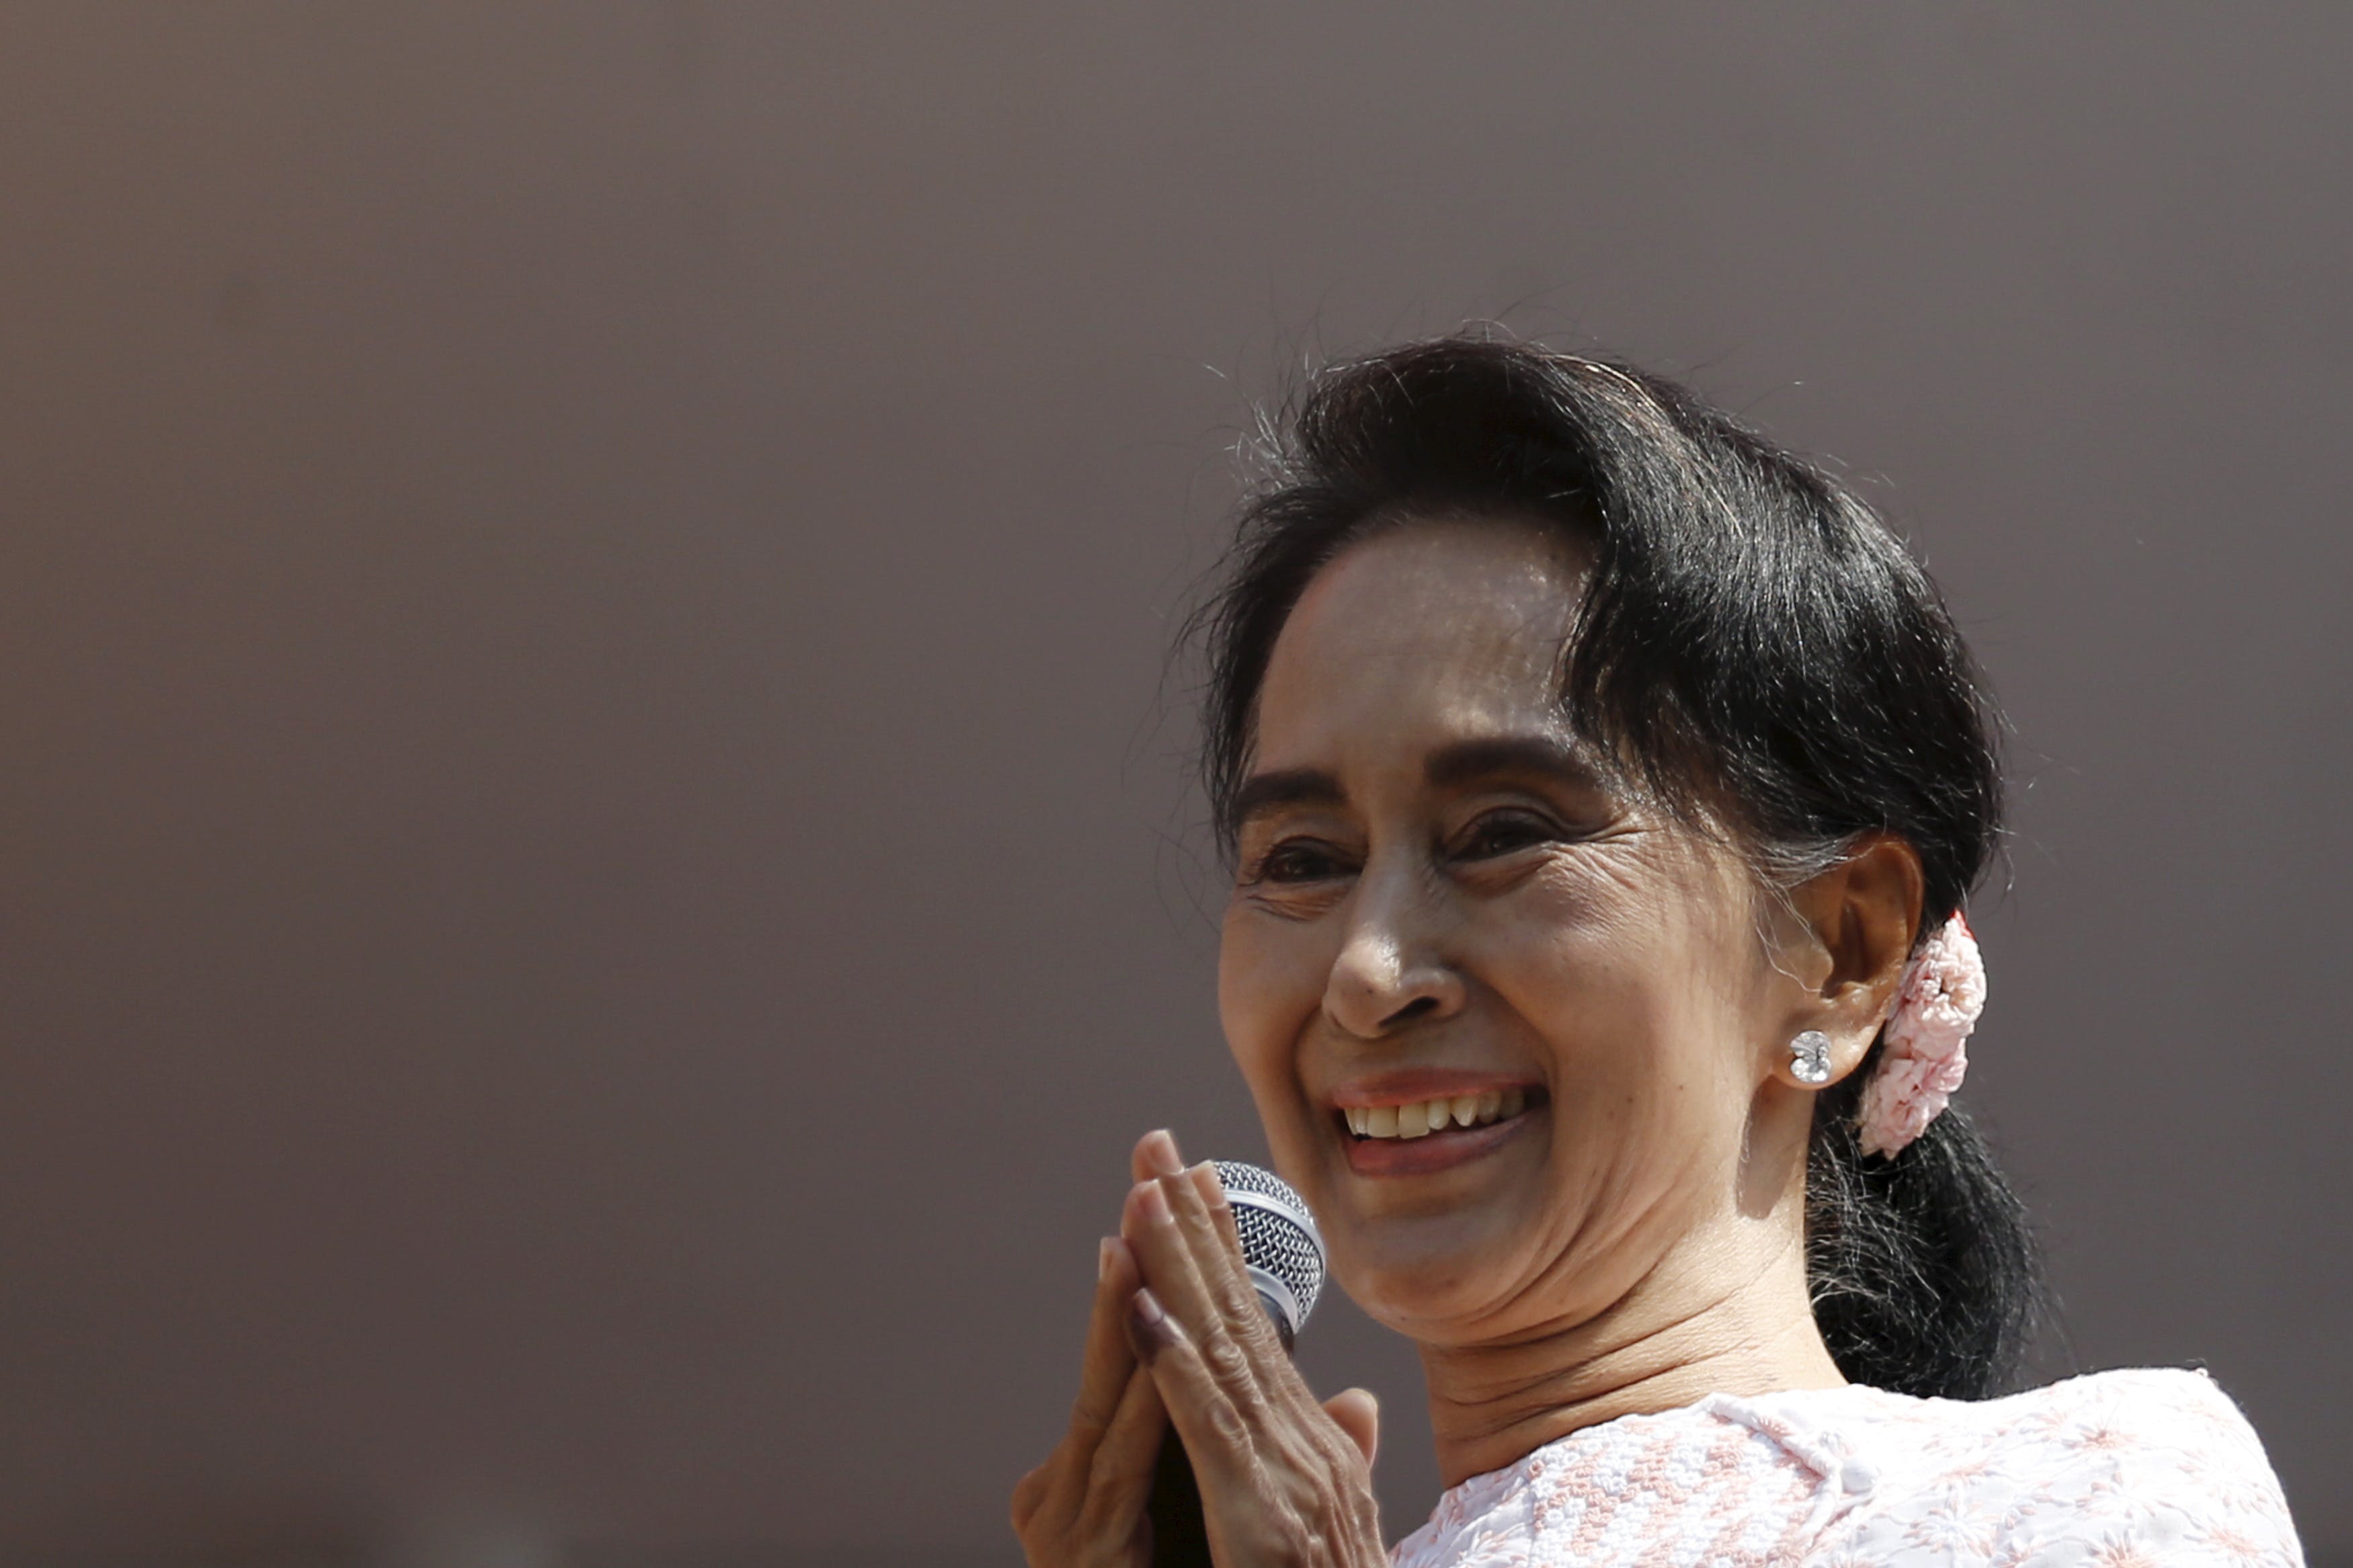 Myanmar's National League for Democracy party leader Suu Kyi talks to supporters after general elections in Yangon